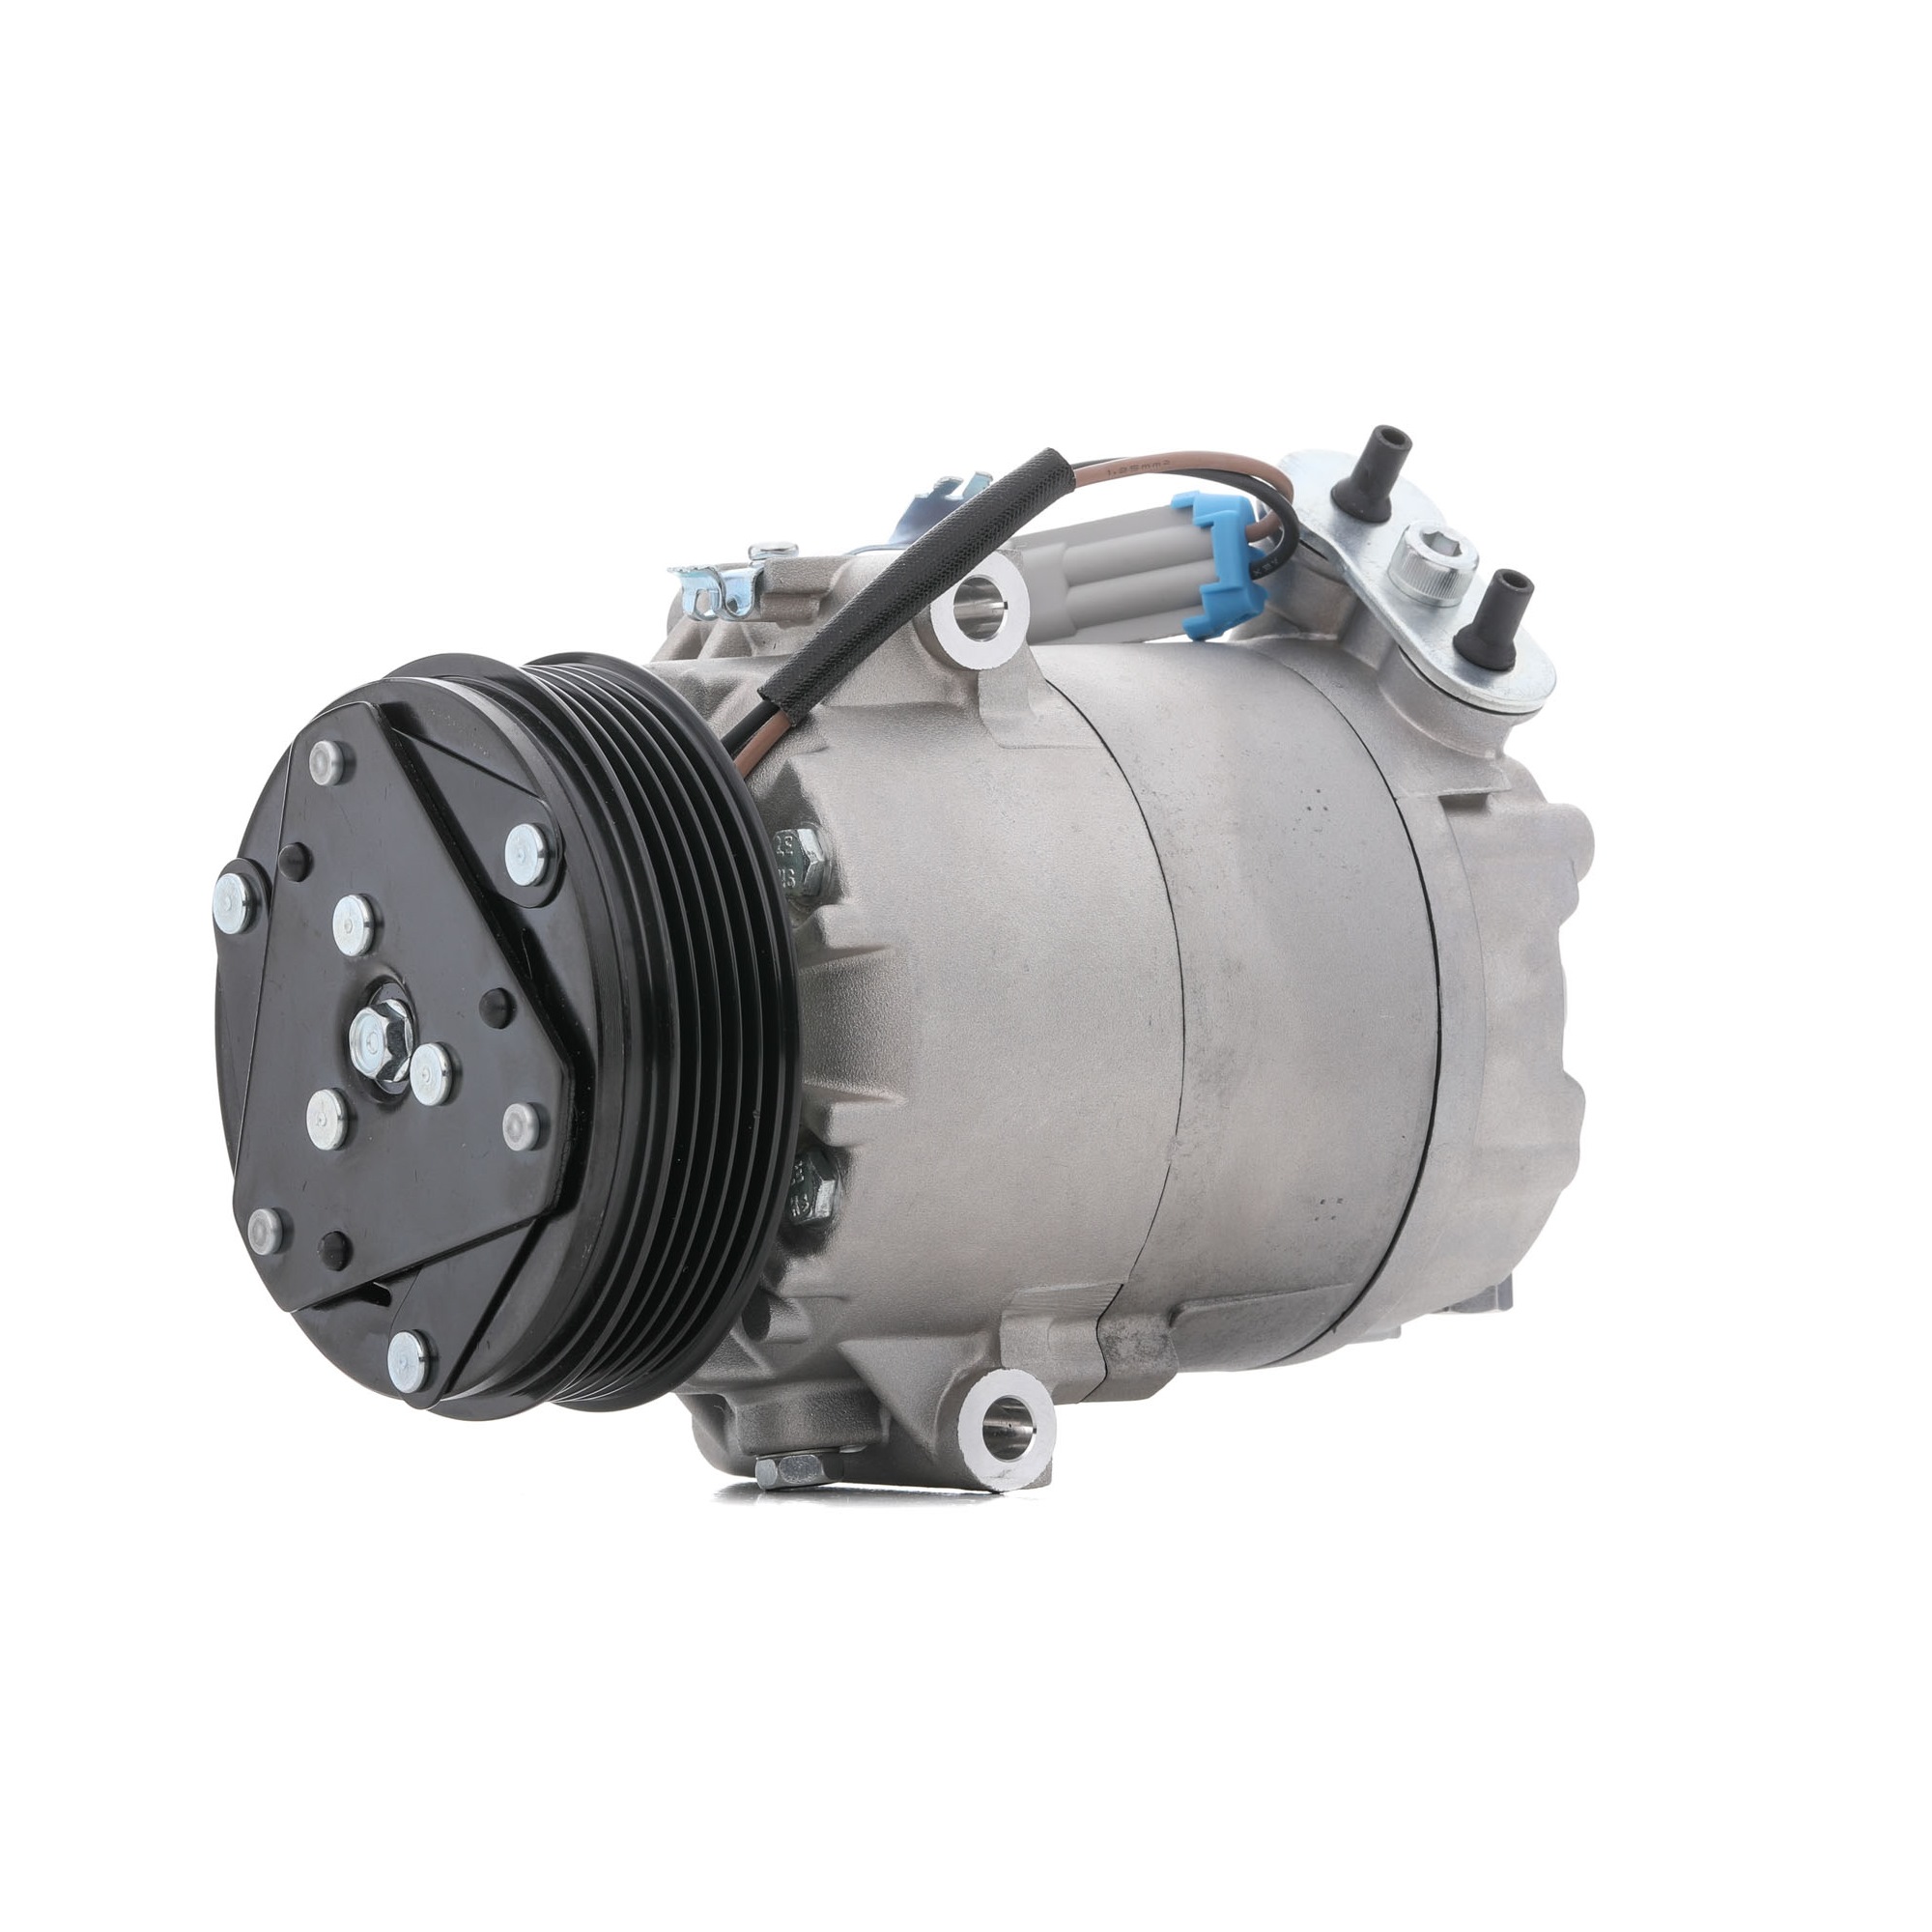 RIDEX 447K0255 Air conditioning compressor CVC, PAG 46, R 134a, with PAG compressor oil